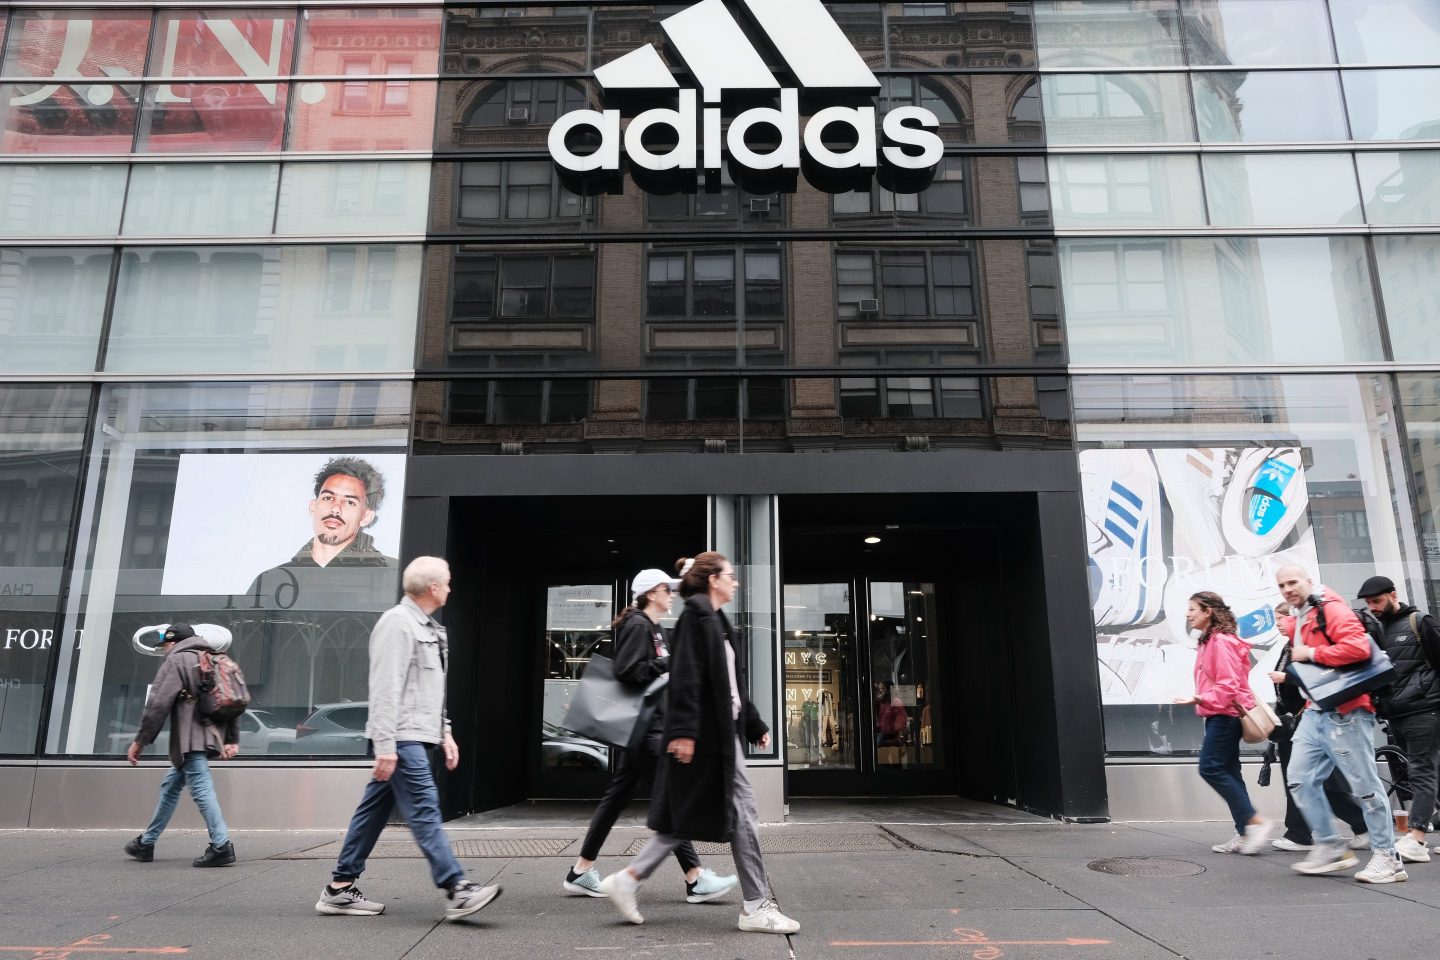 People walk outside of an Adidas store.